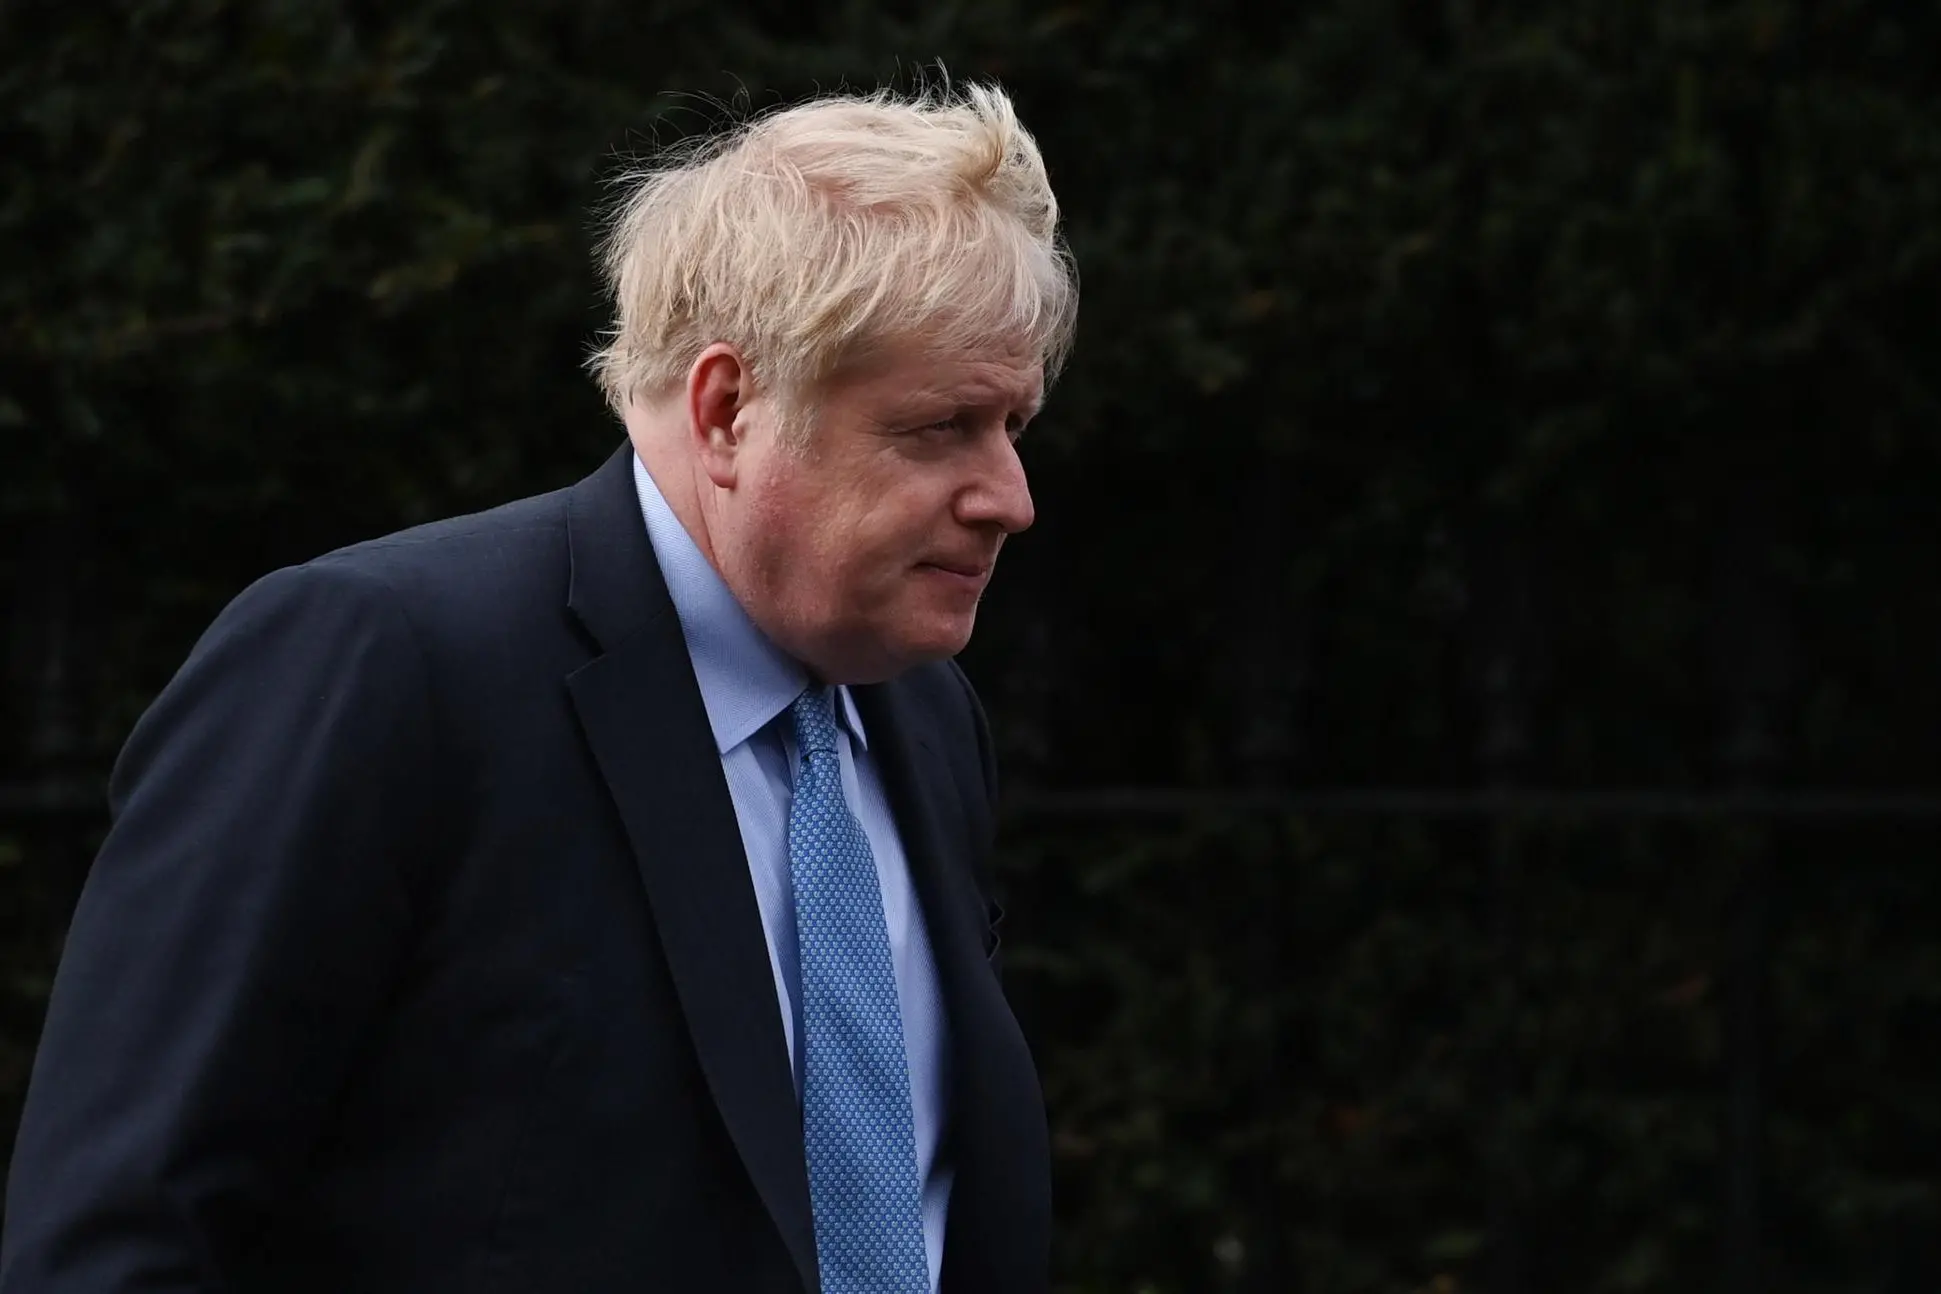 epa10536448 Britain's former Prime Minster Boris Johnson departs his home in London, Britain, 22 March 2023. Johnson is set to give evidence to MPs who are investigating accusations that he misled parliament over Partygate after breaching covid rules in 2020. EPA/NEIL HALL